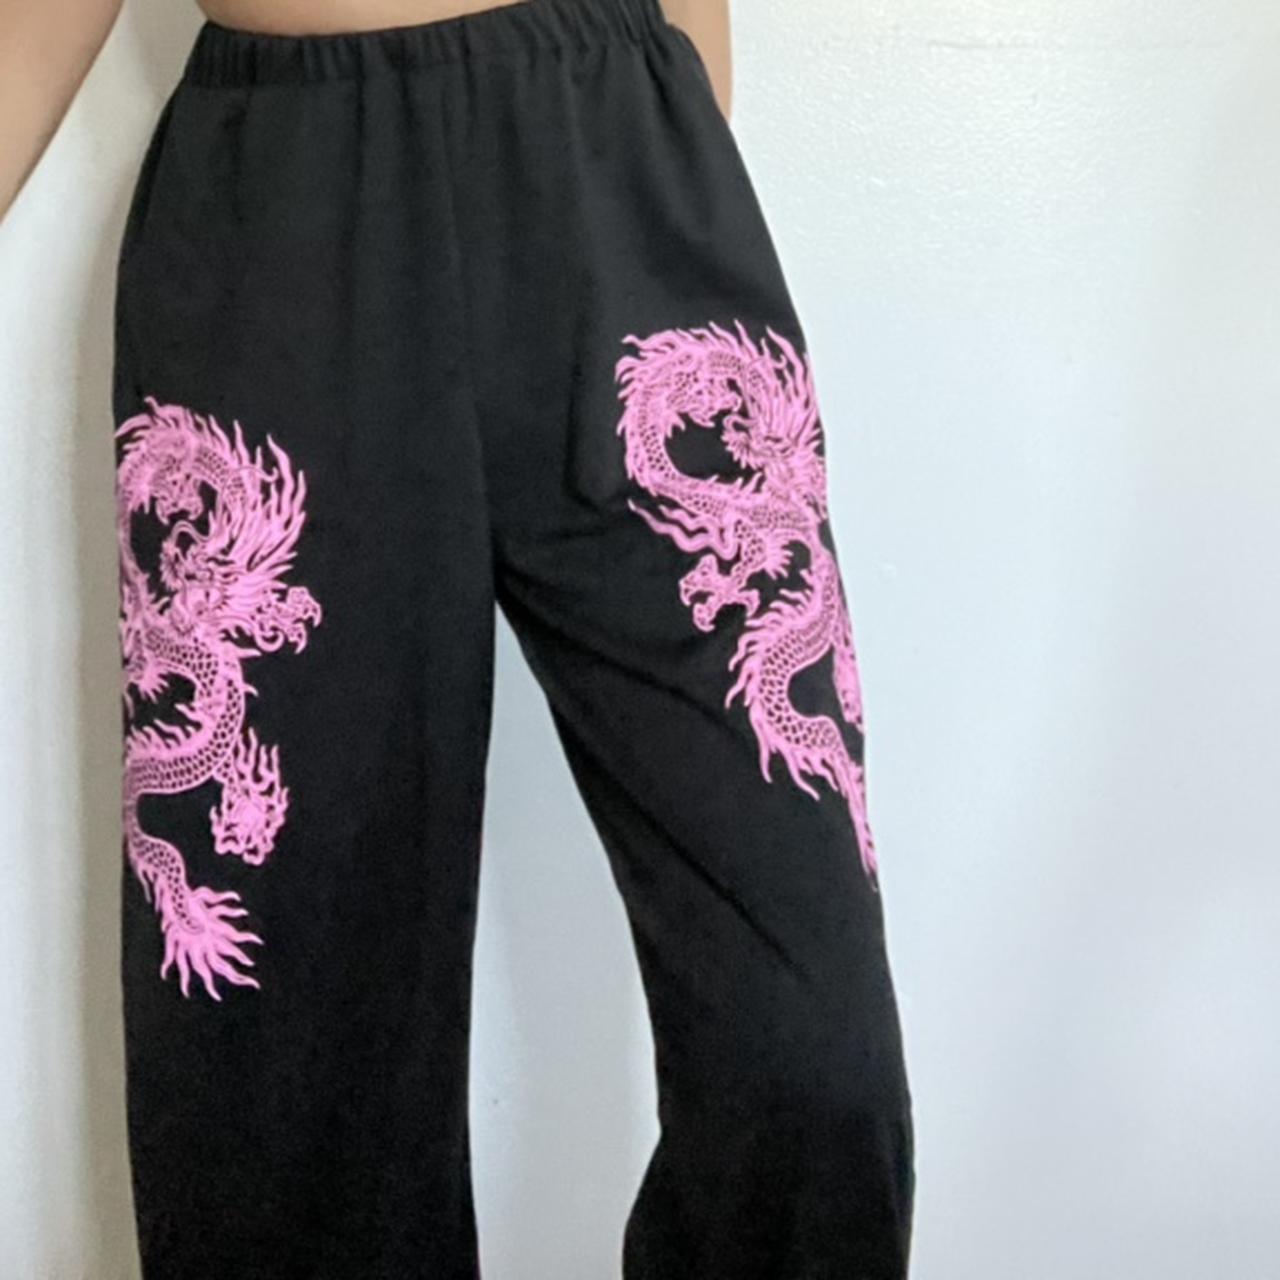 Black thin sweat pants with pink dragons on both